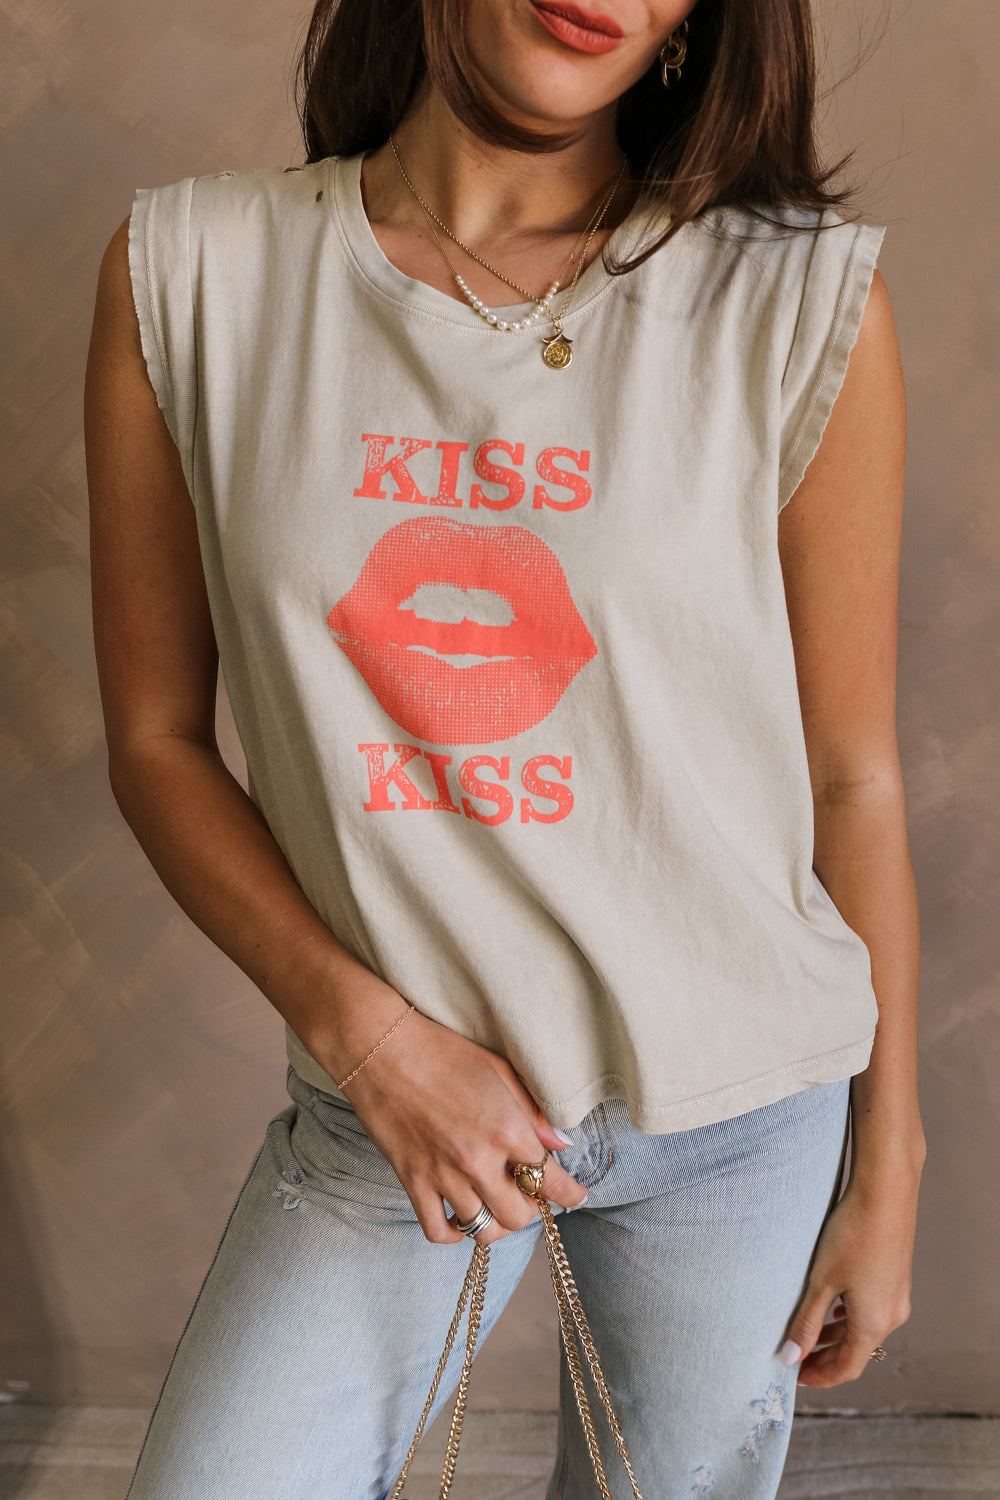 Close up view of female model wearing the Kiss Stone Taupe Graphic Top which features Stone Taupe Cotton Fabric, Distressed Details, Sleeveless, Round Neckline and Kiss Graphic with Lips